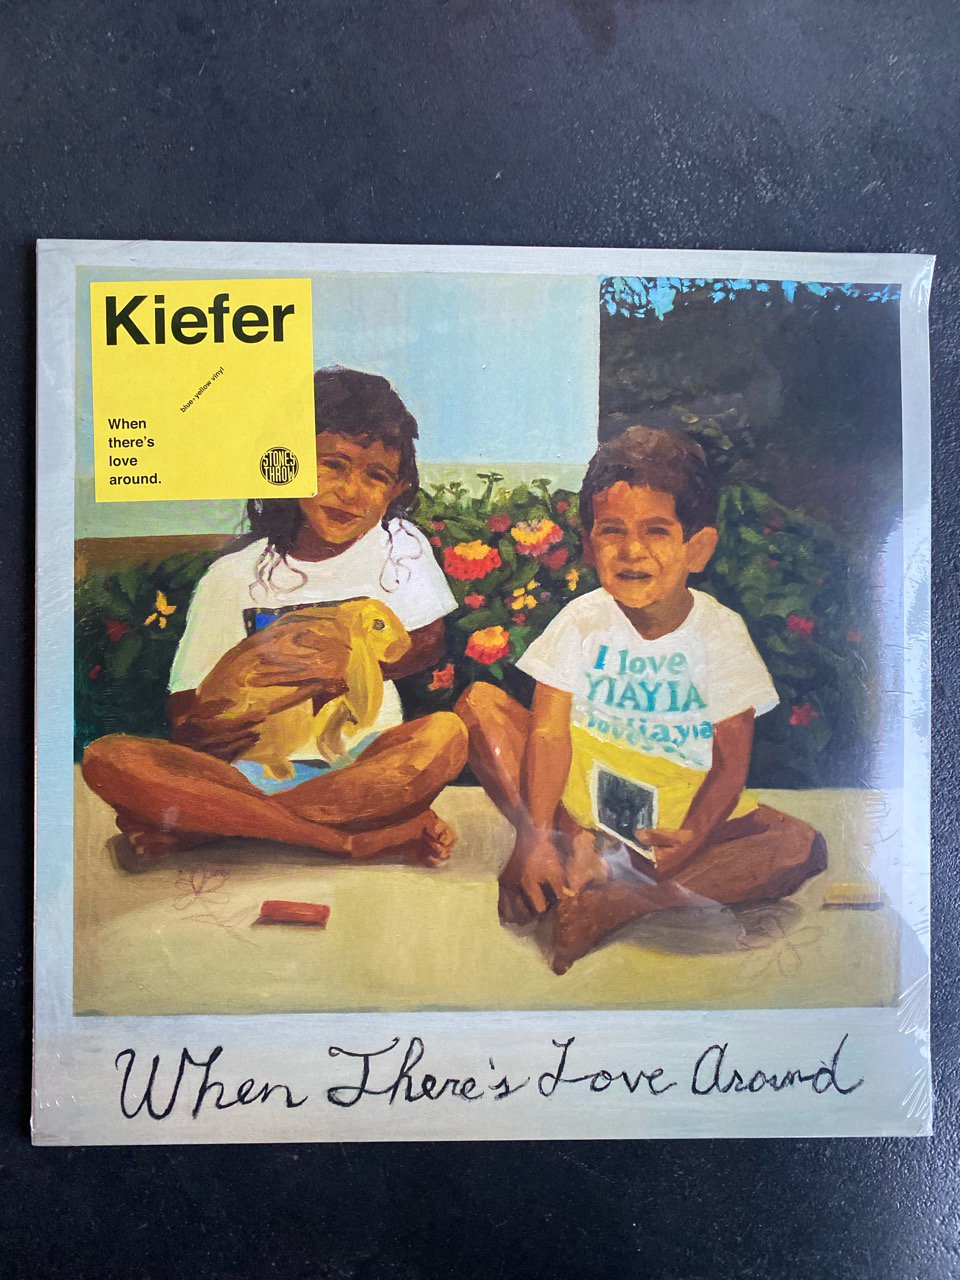 Kiefer / When there's love around (blue + yellow vinyl) 